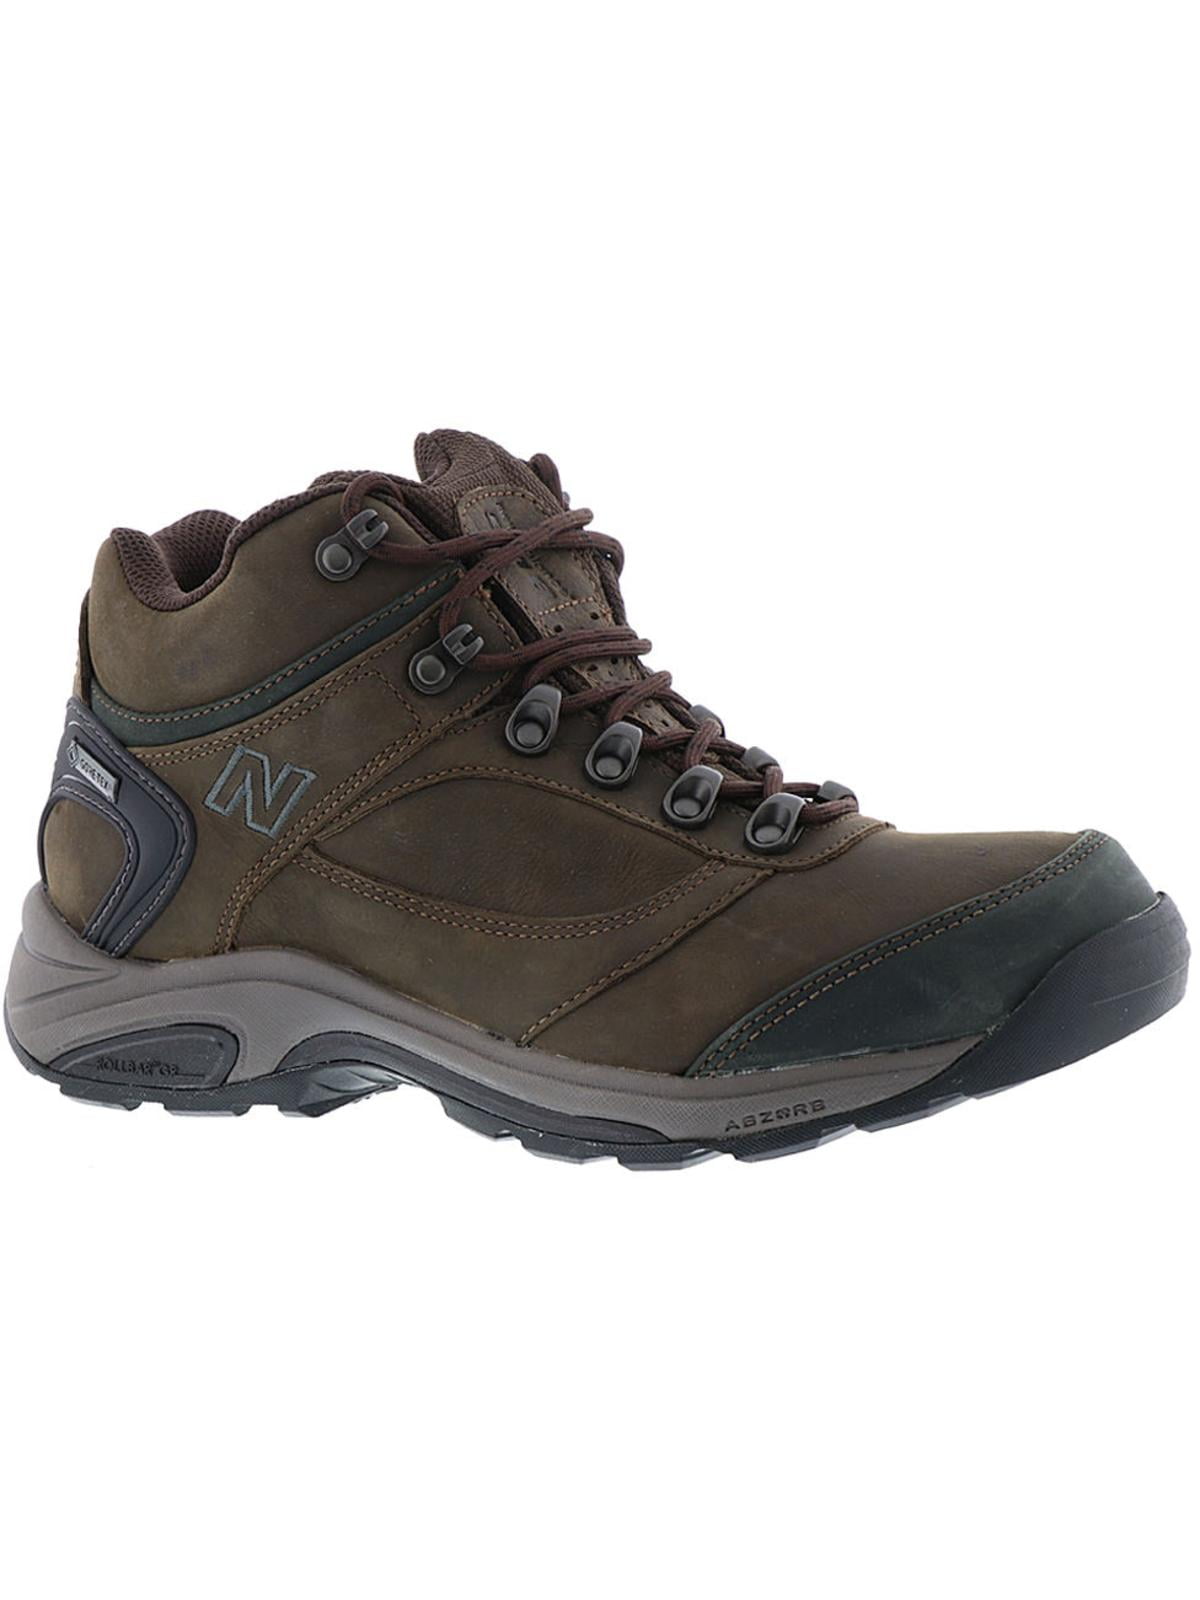 New Balance Mens 978 Leather Hiking, Trail Shoes Brown 11.5 Extra Wide ...